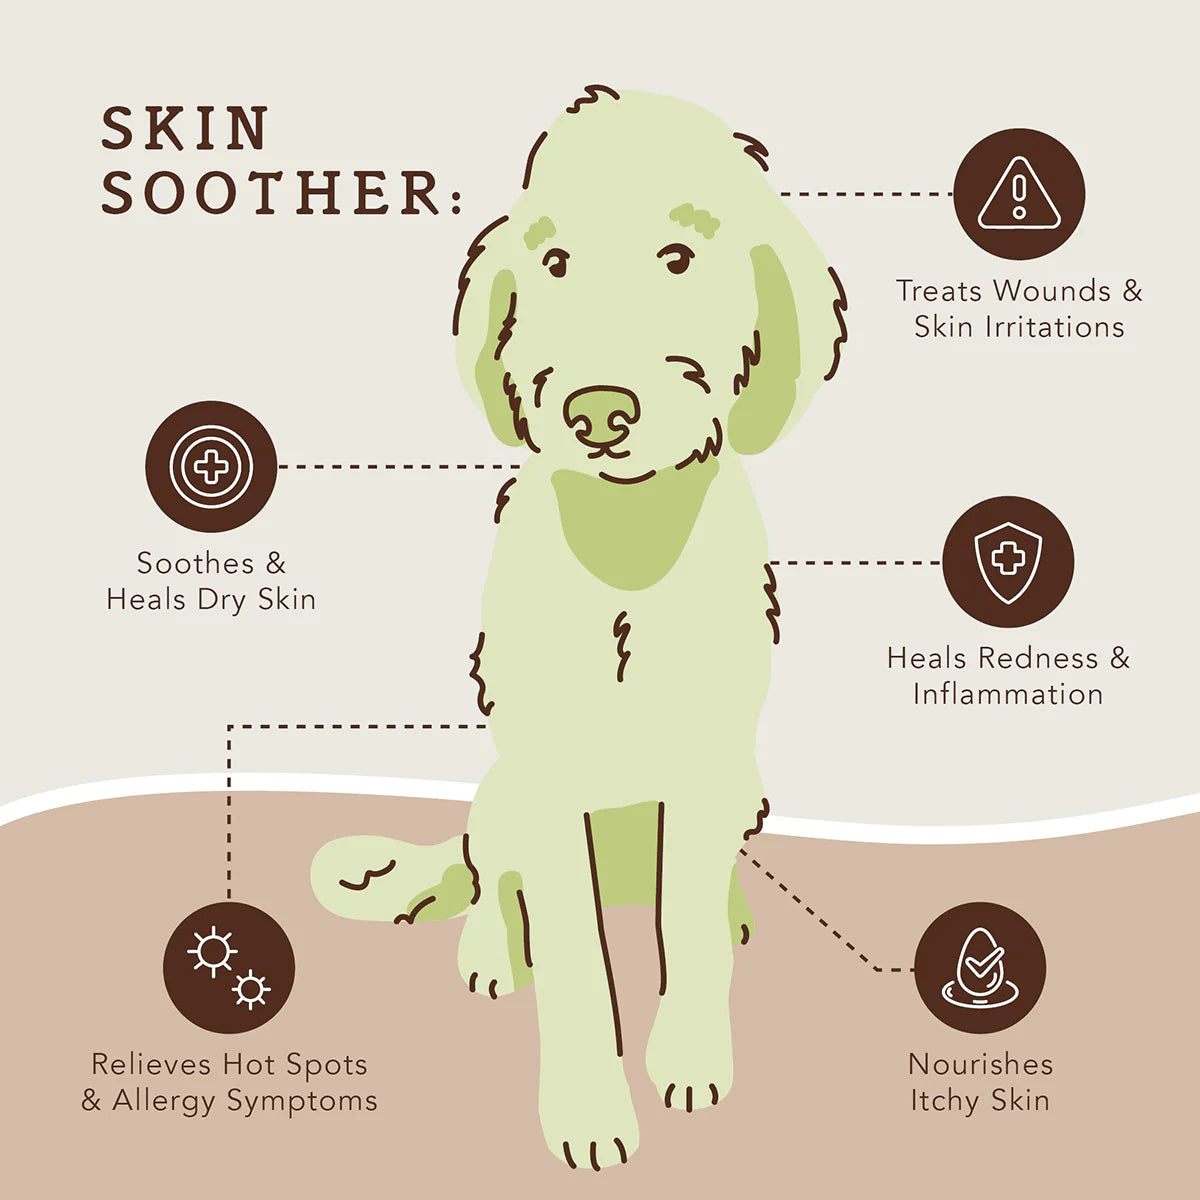 "Organic Skin Soother